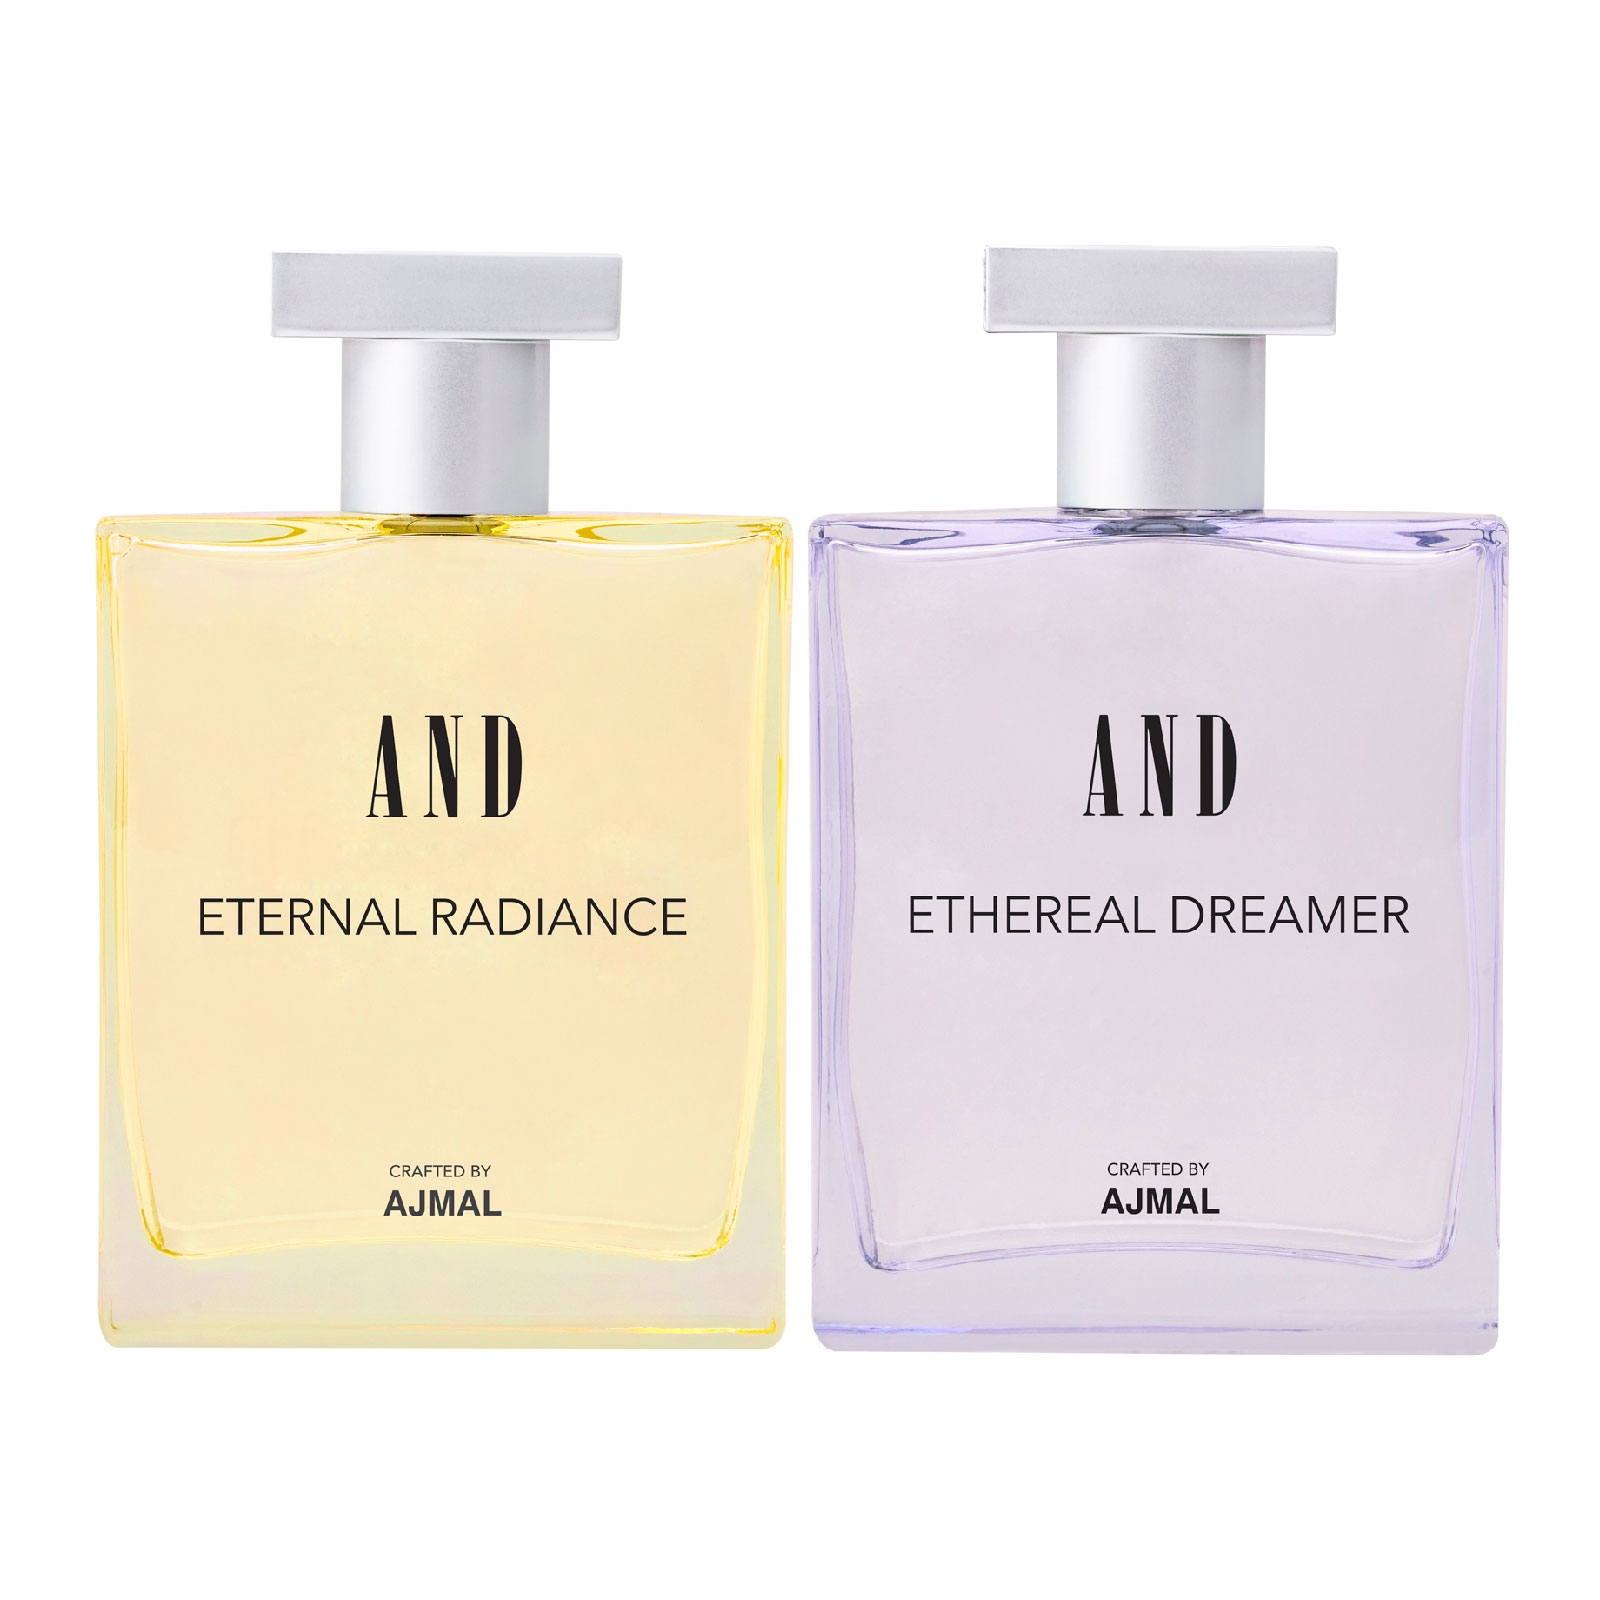 Ajmal | AND Eternal Radiance & Ethereal Dreamer Pack of 2 Eau De Perfume 50ML each  for Women Crafted by Ajmal 0